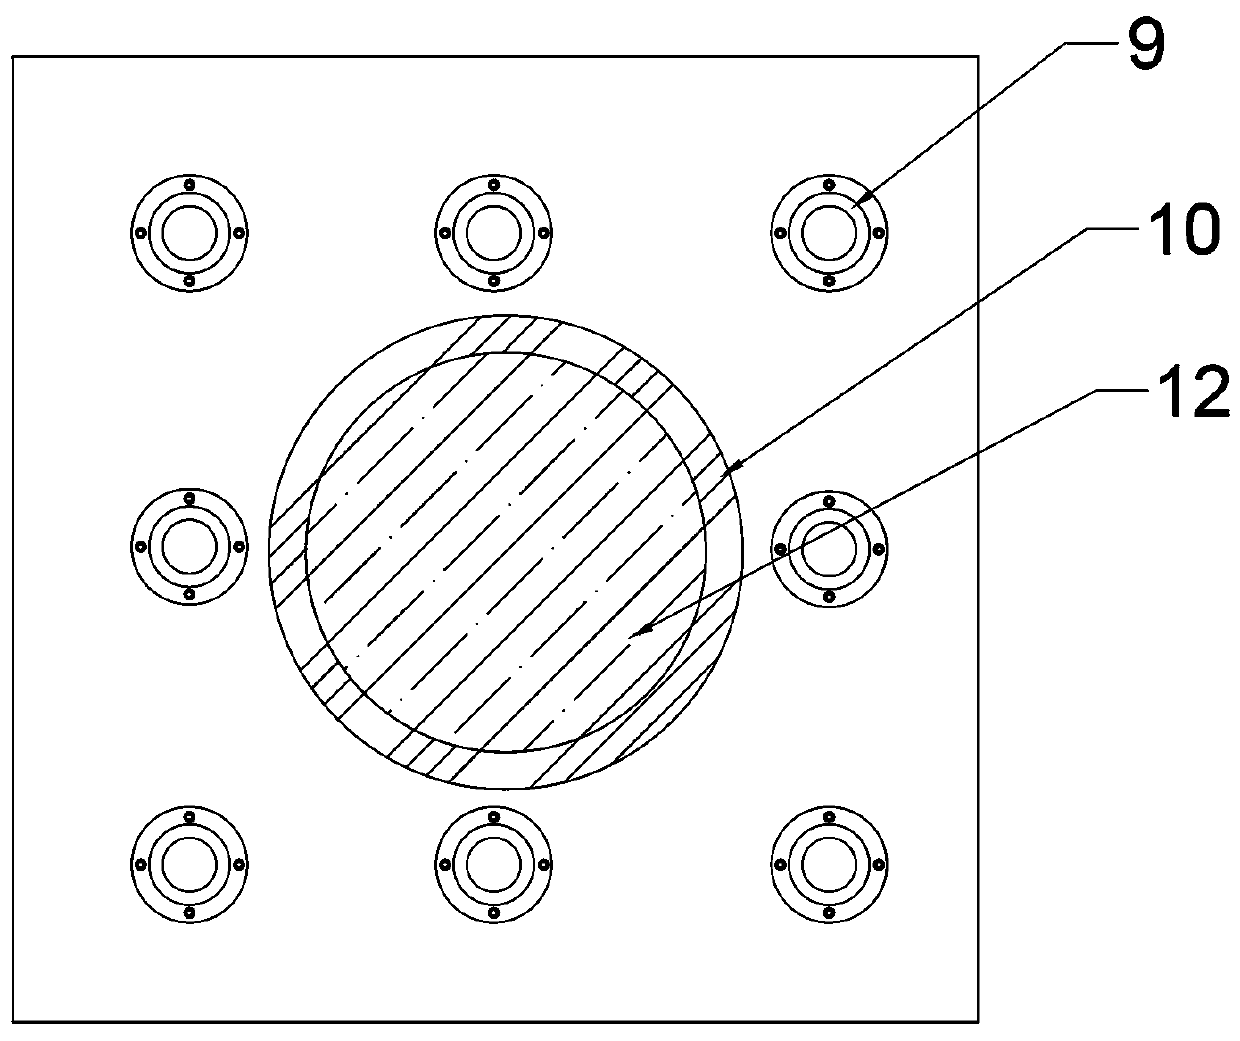 A connected two-way shock-isolation bearing system